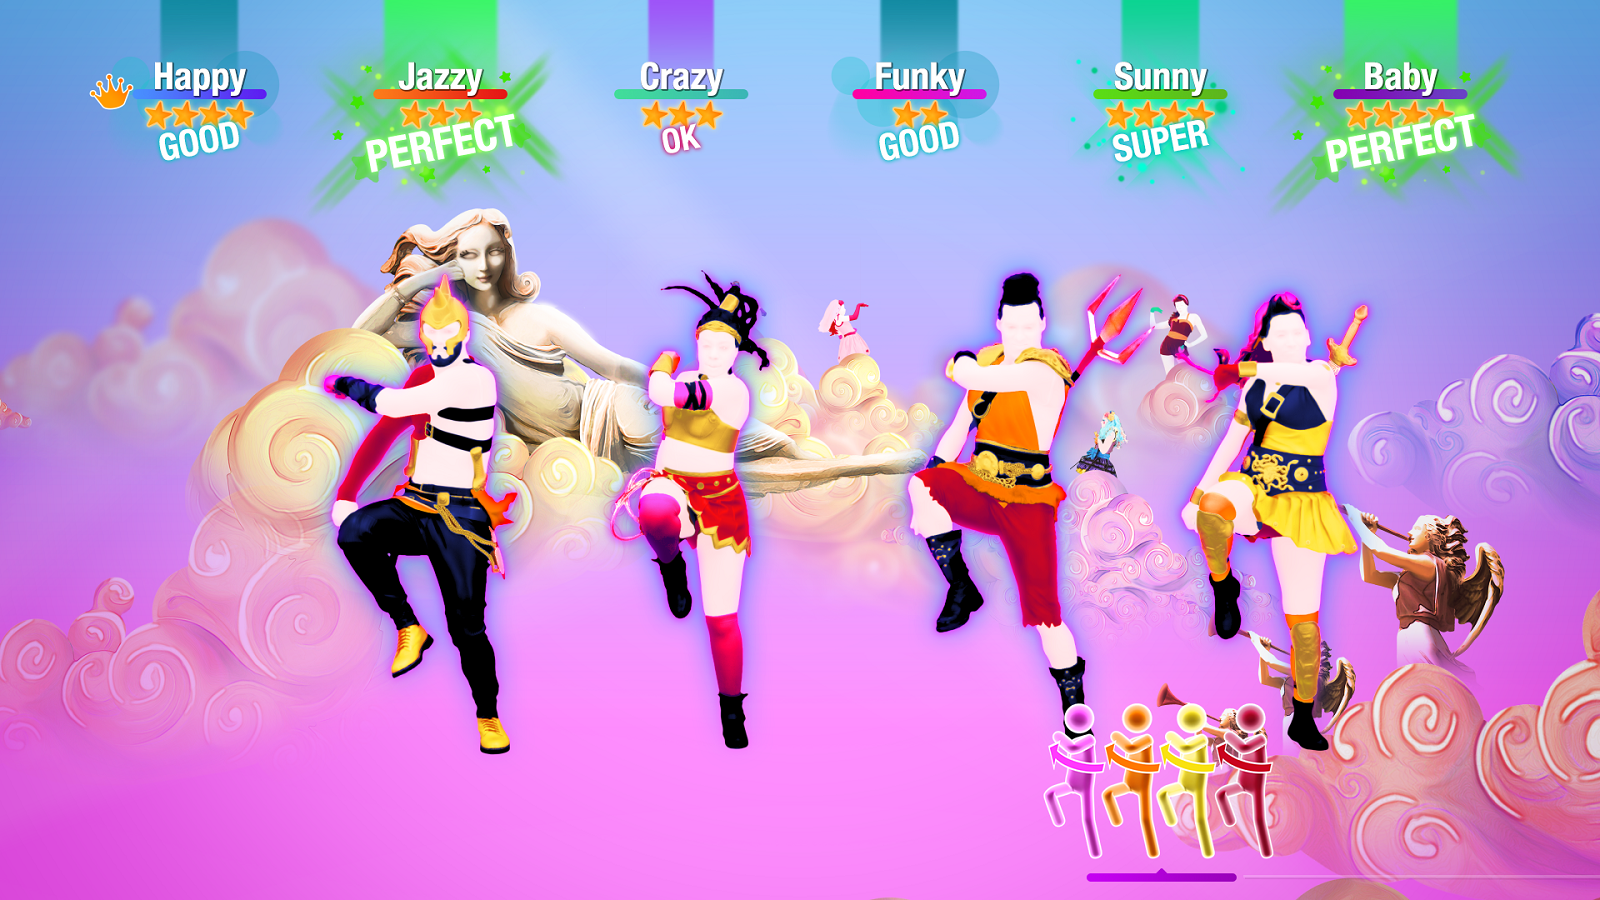 playstation 4 just dance 2020